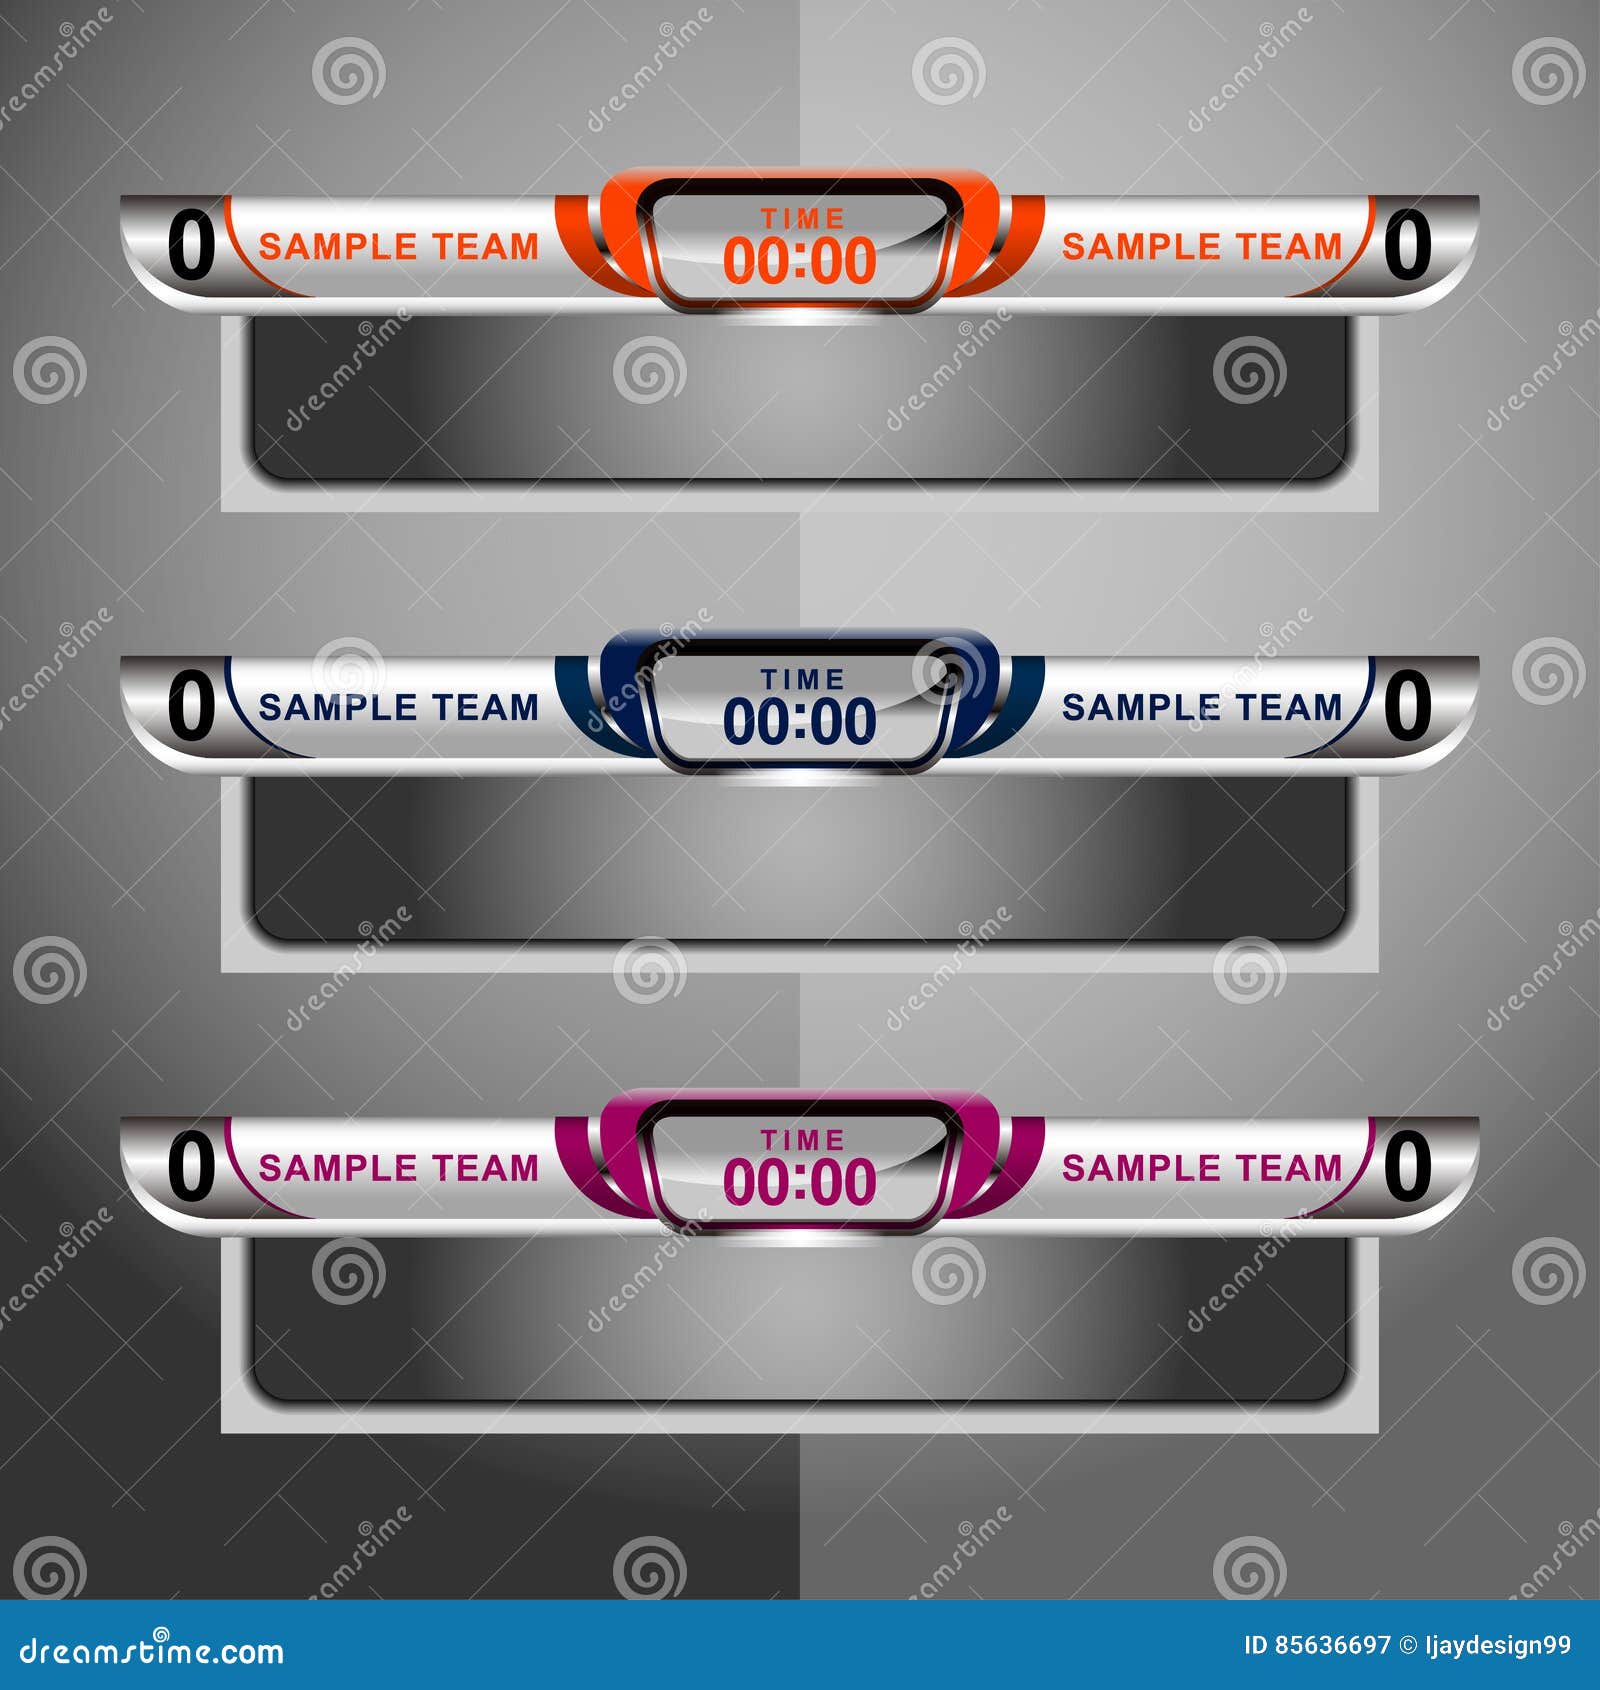 Free Football Scoreboard Template from thumbs.dreamstime.com